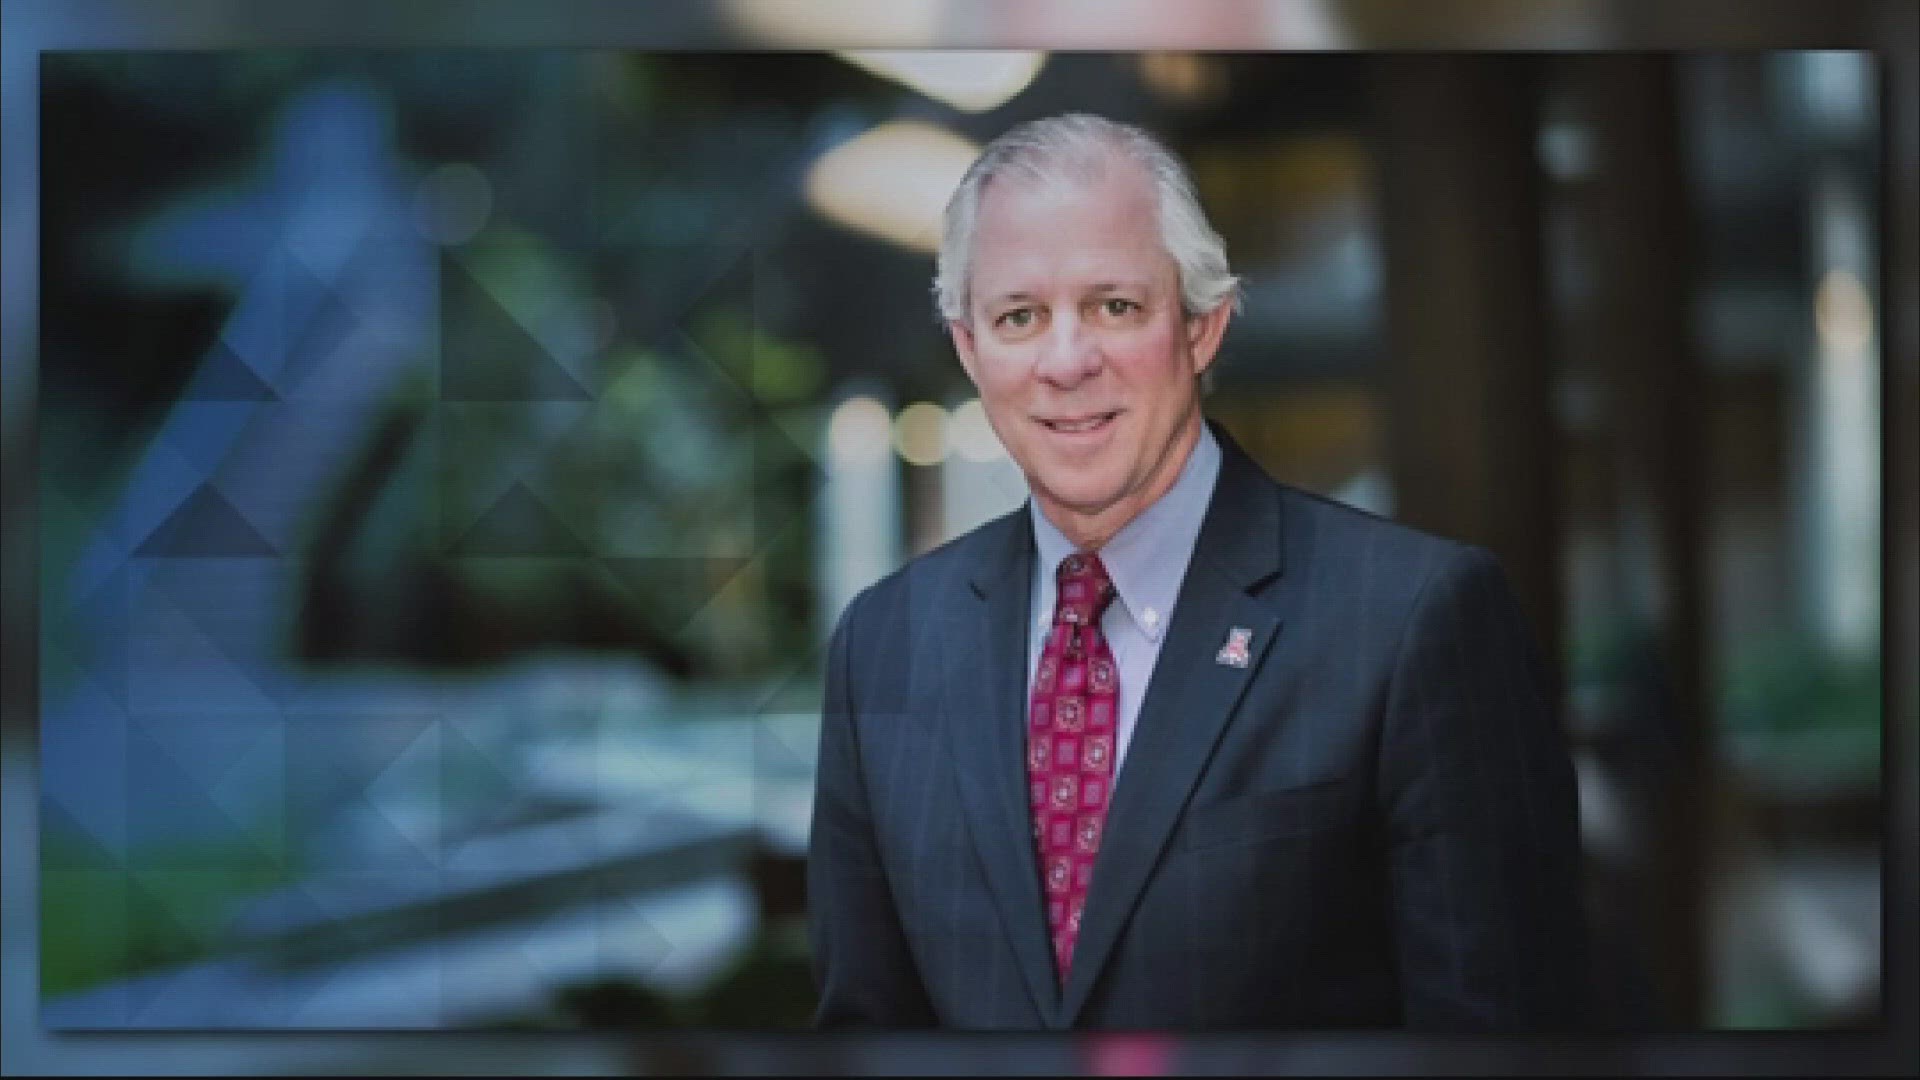 University of Arizona President Robert Robbins said that he will step down at the end of his contract.